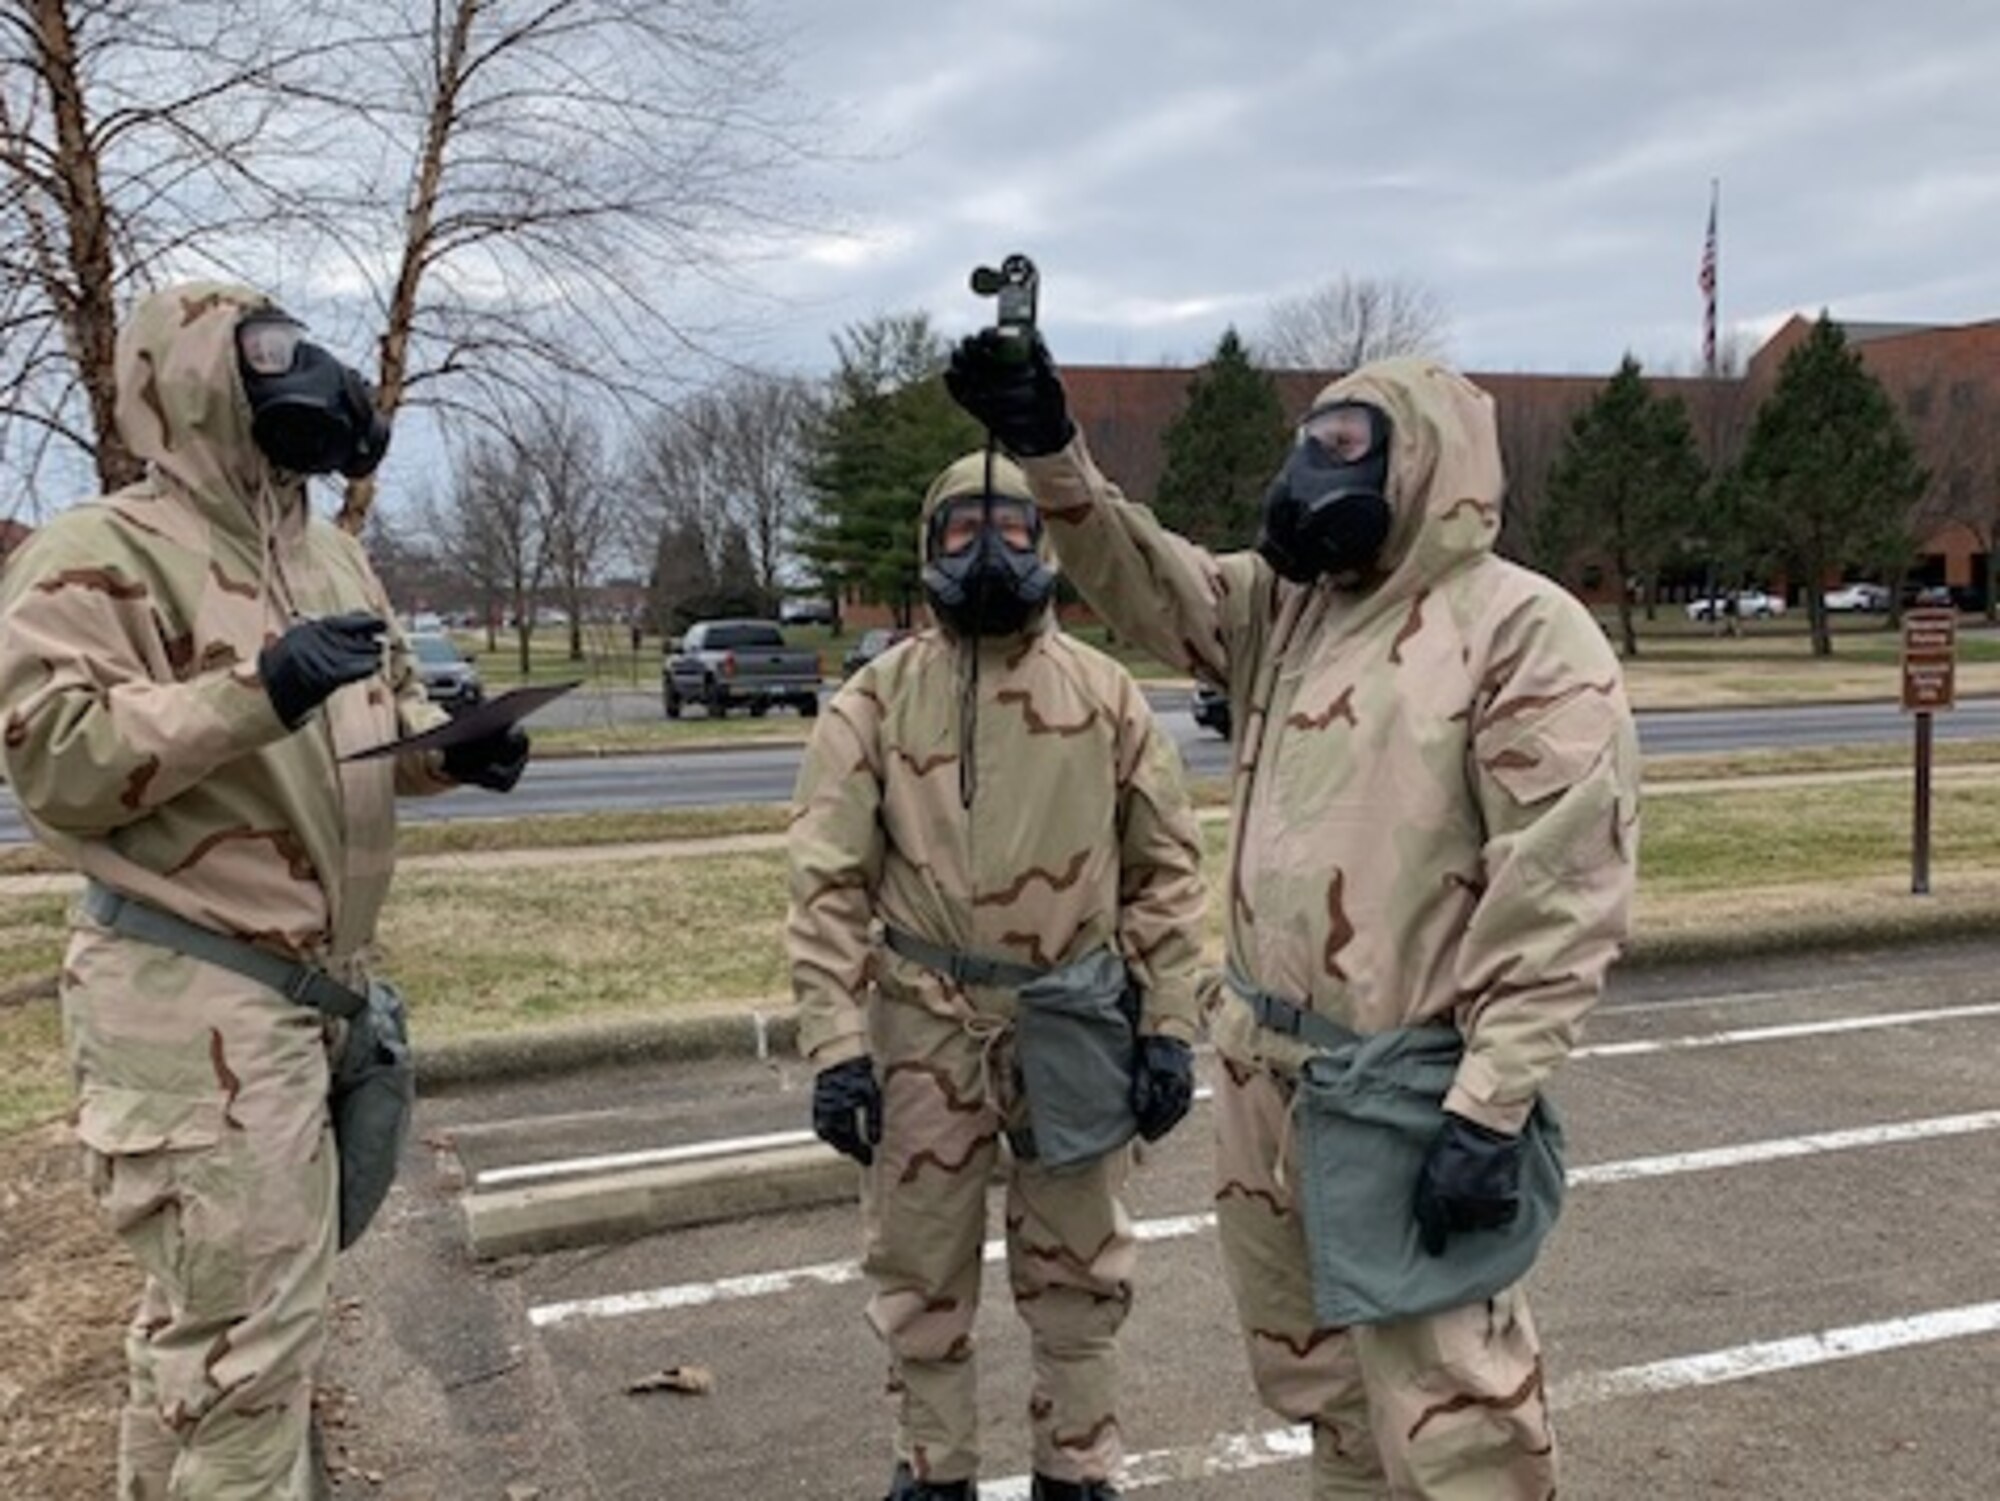 Airmen in protective gear taking weather readings.